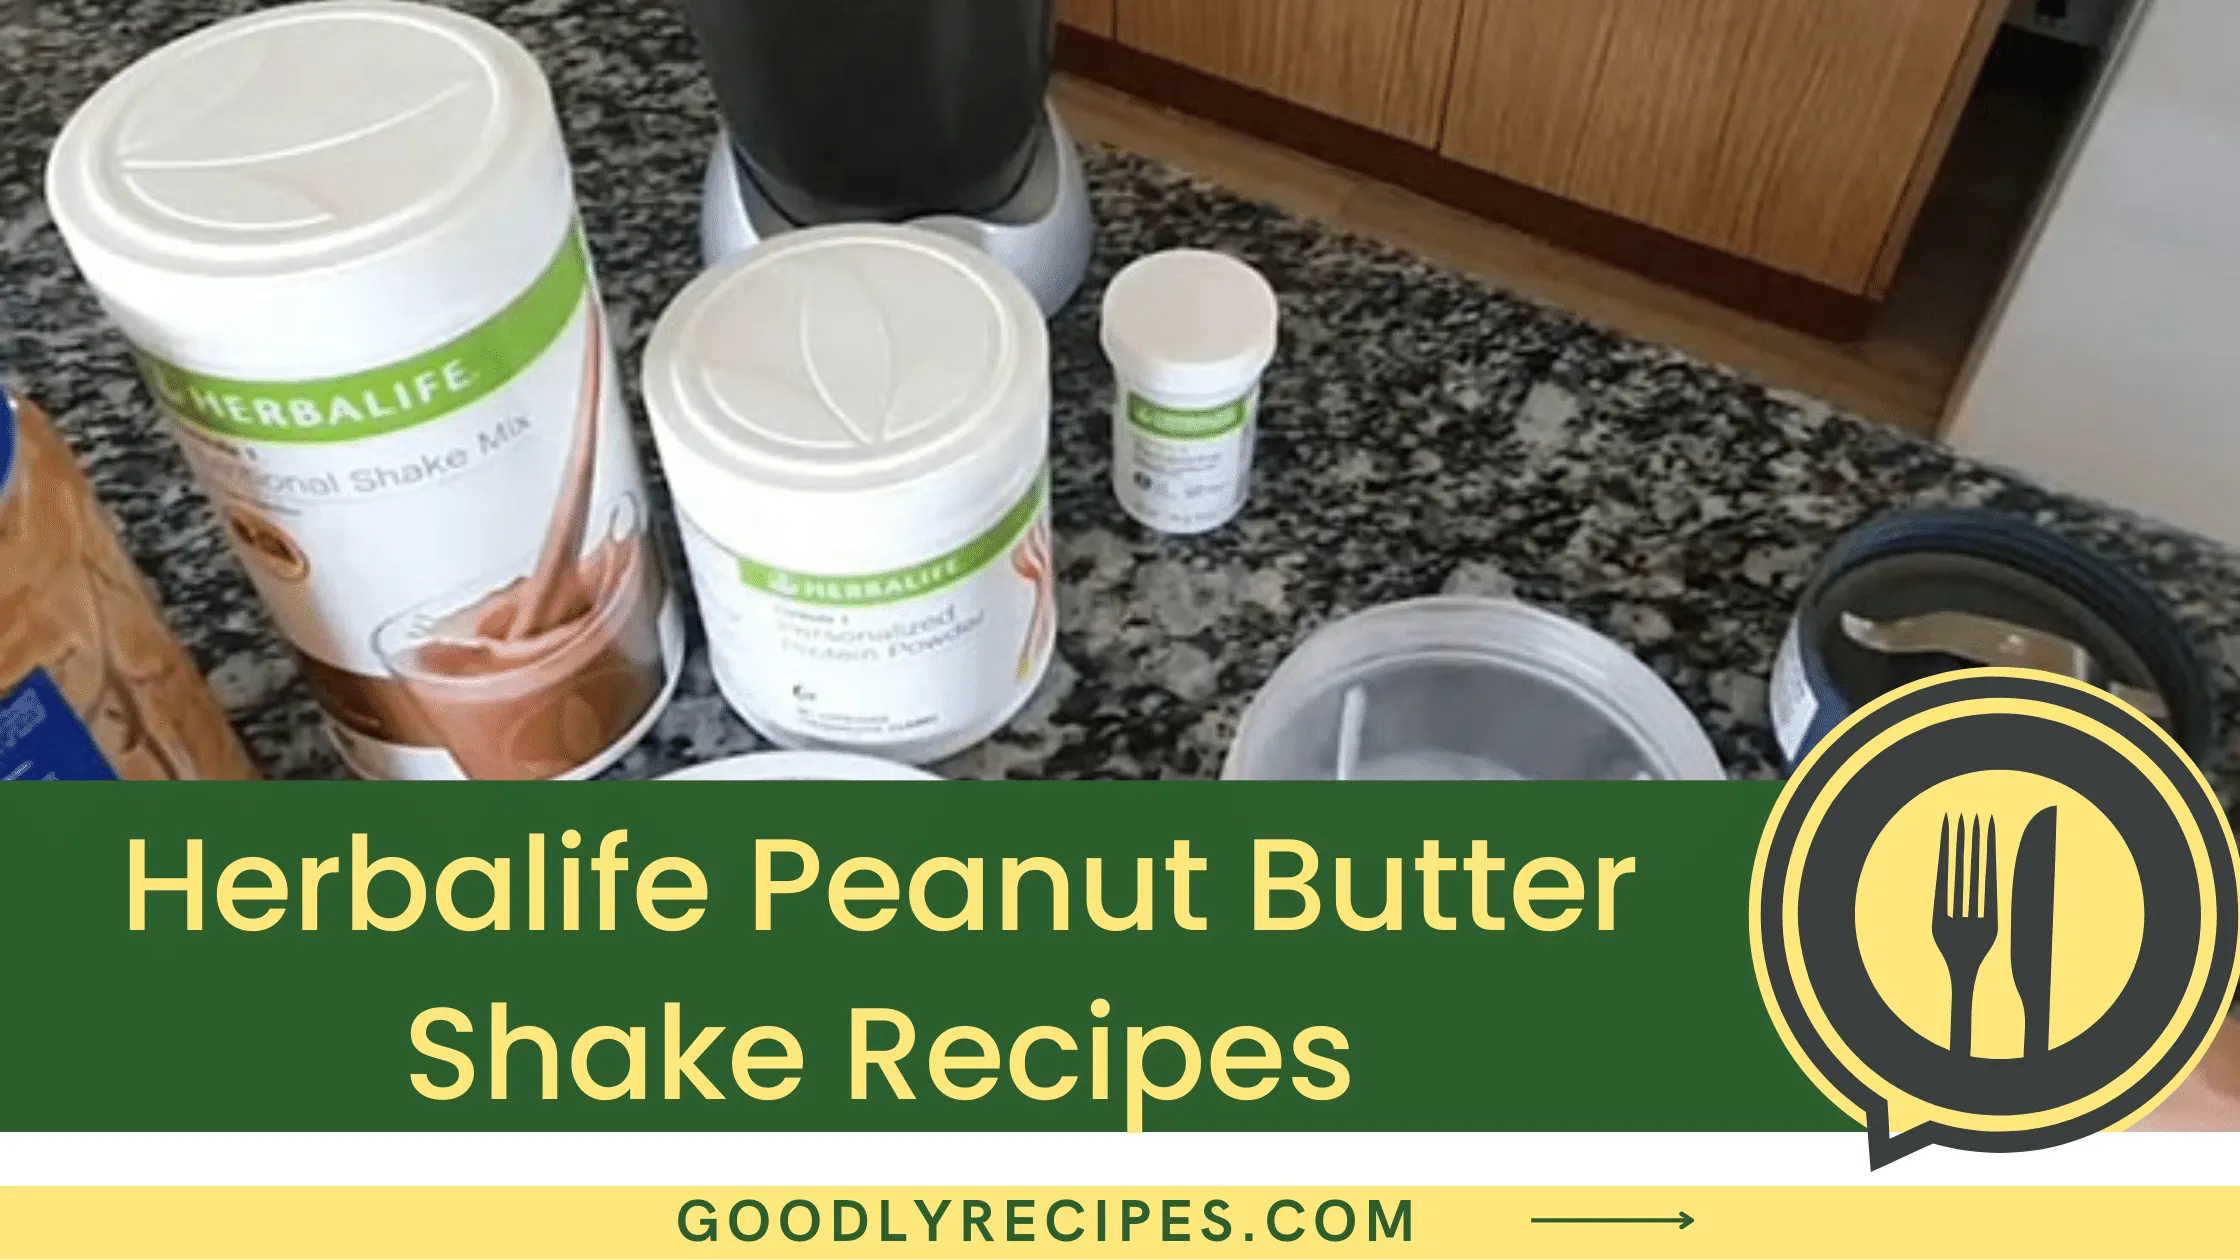 What is Herbalife Peanut Butter Shake?